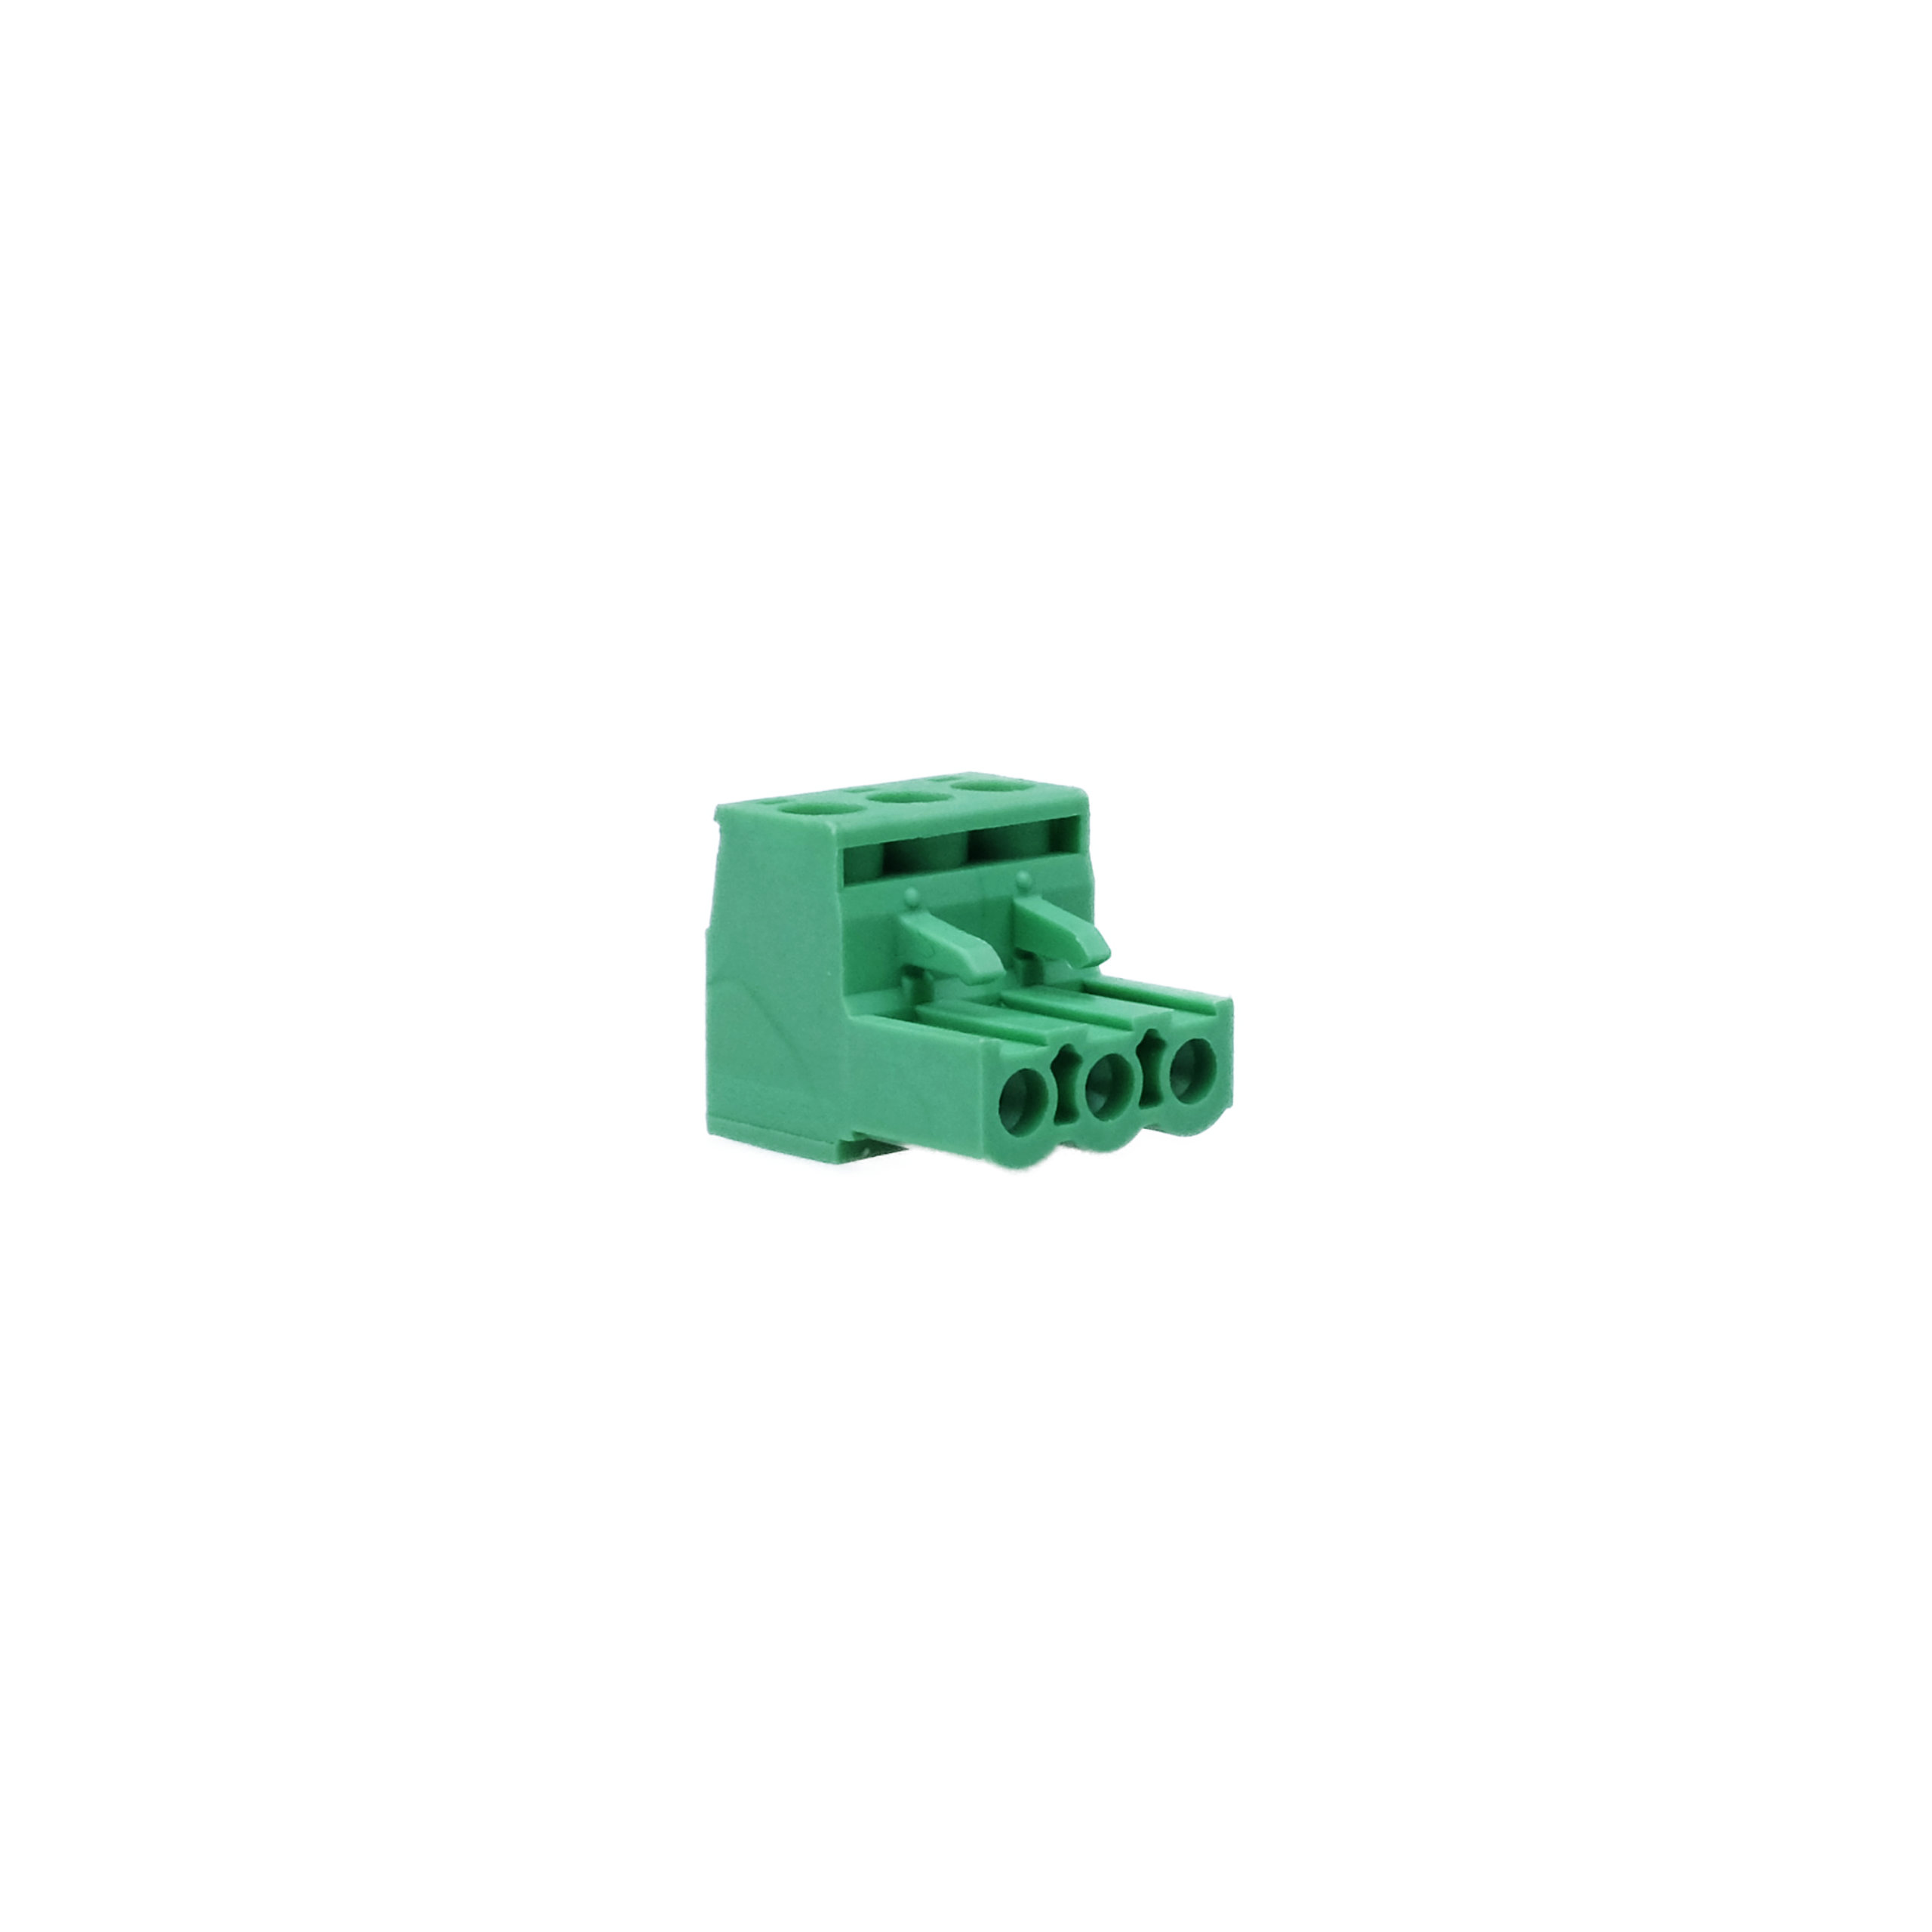 Phoenix Contact Connector MSTB 2.5/ 3-ST-5.08 3 pin 1757022